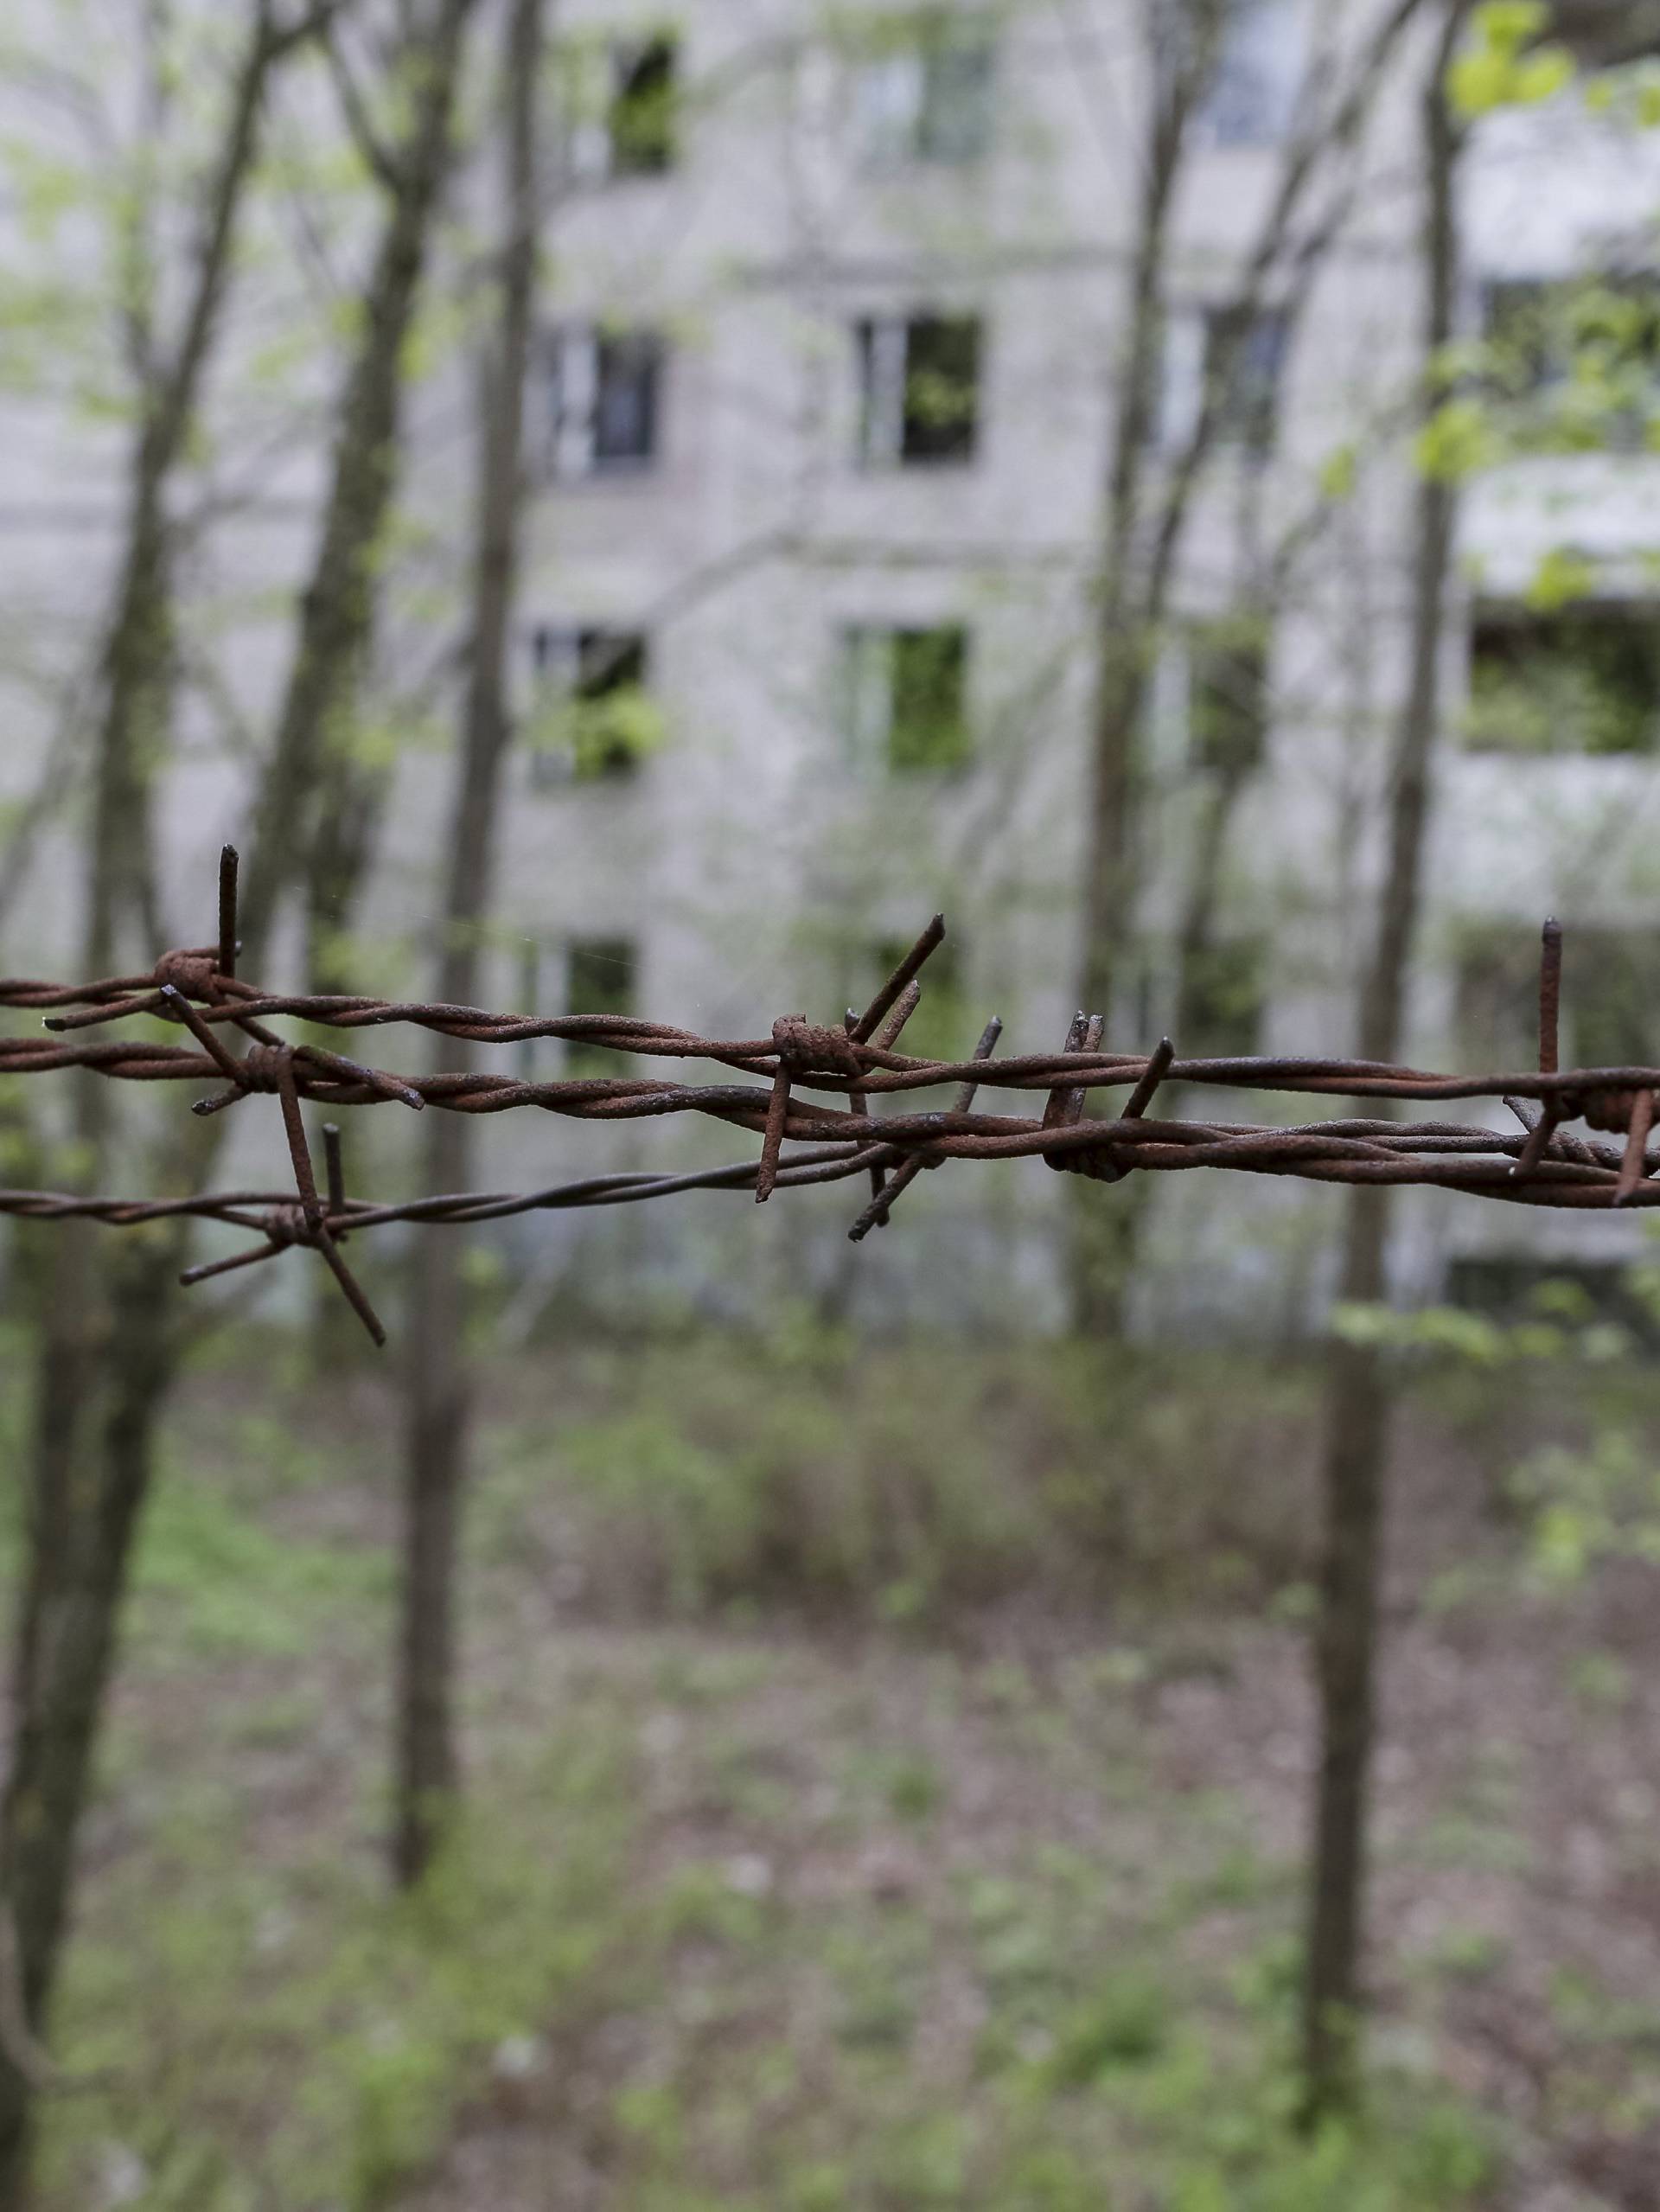 Barbed wire is seen surrounding a building in the abandoned city of Pripyat near the Chernobyl nuclear power plant